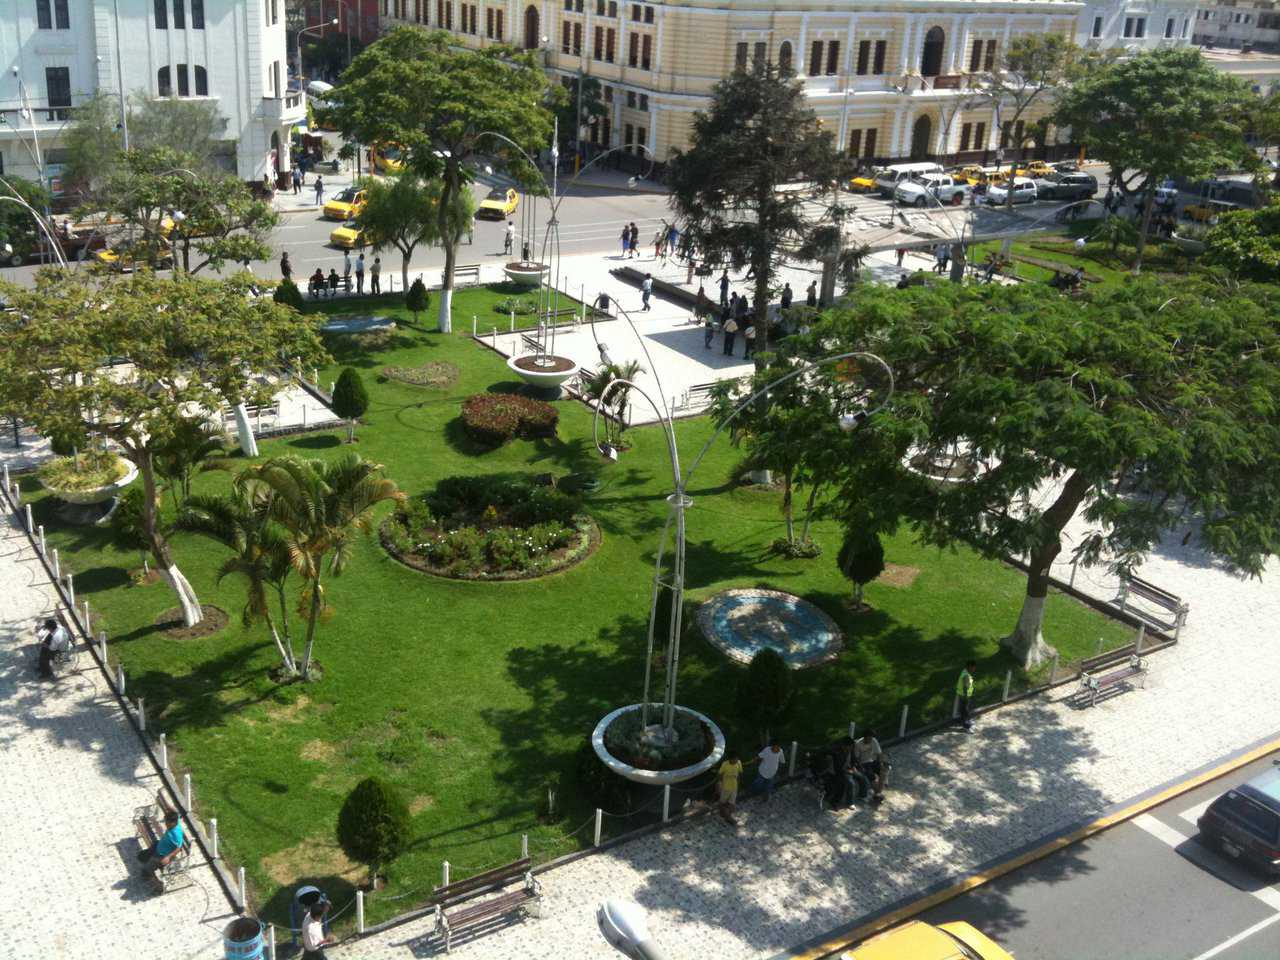 Chiclayo Plaza de Armas — When you come to Chiclayo this is one of the first things you’ll see. Parks are everywhere in Peru.  They are surrounded by the commercial center and allow social interaction on warm evenings.